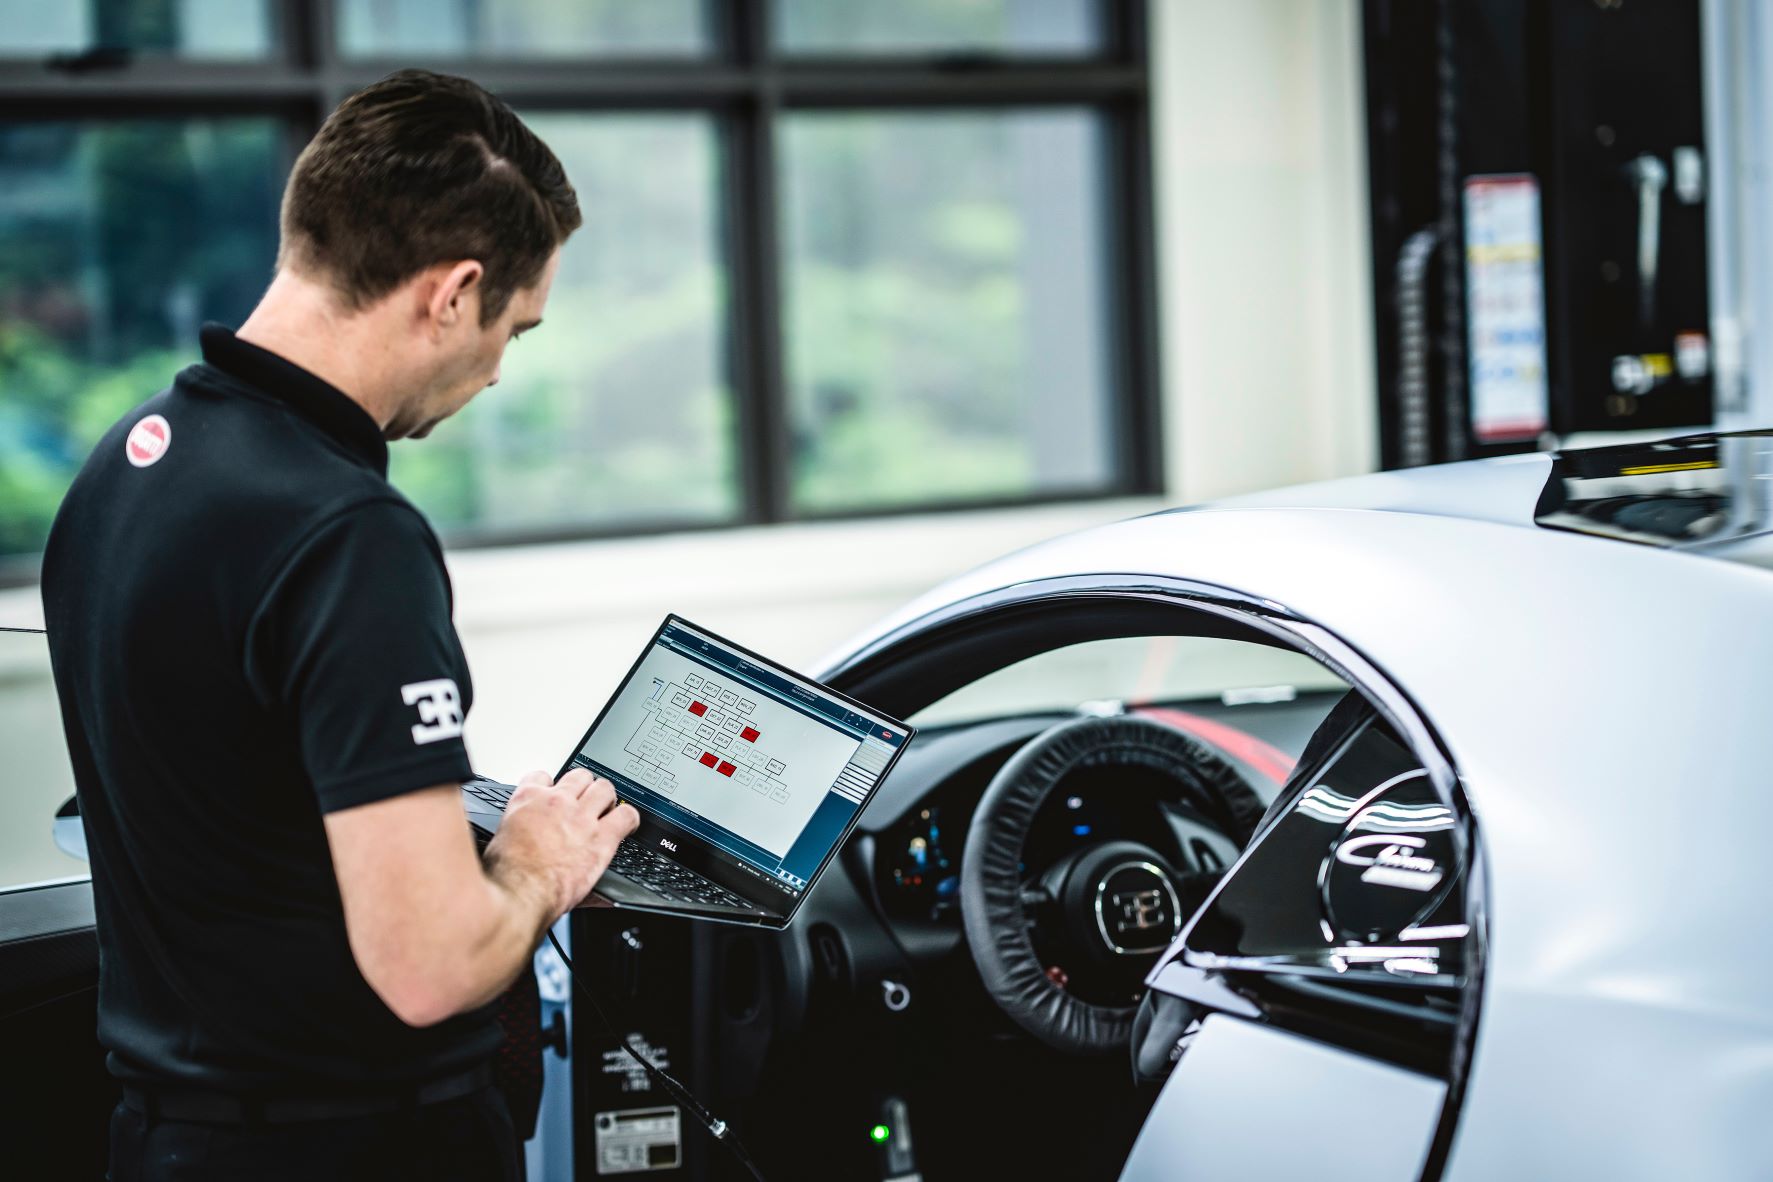 A Bugatti technician at work under the Certified Pre-Owned Program